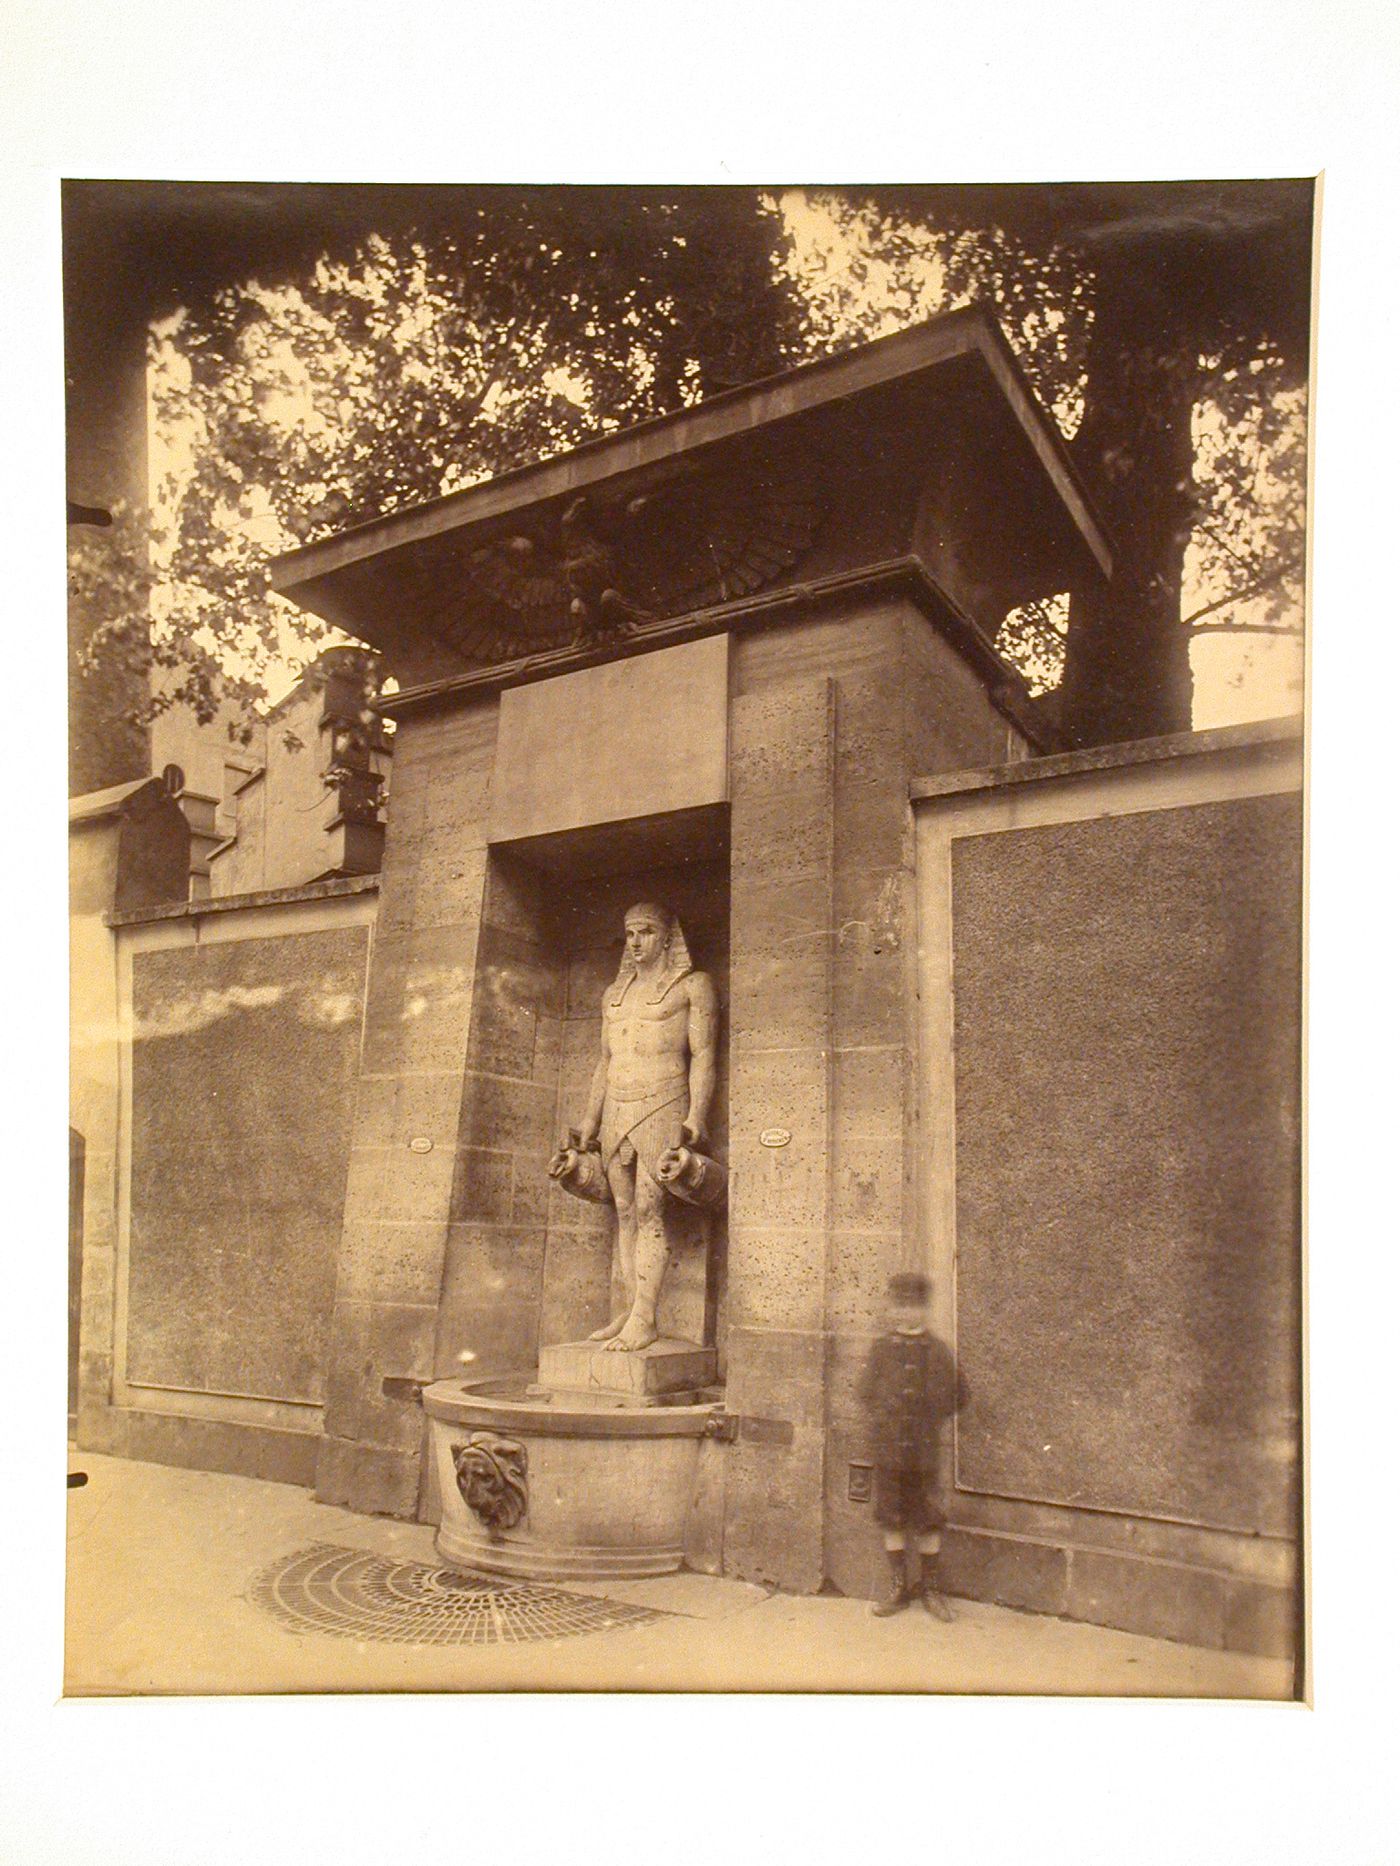 Egyptian style fountain, rue de Sèvres, with "ghost" of boy, Paris, France